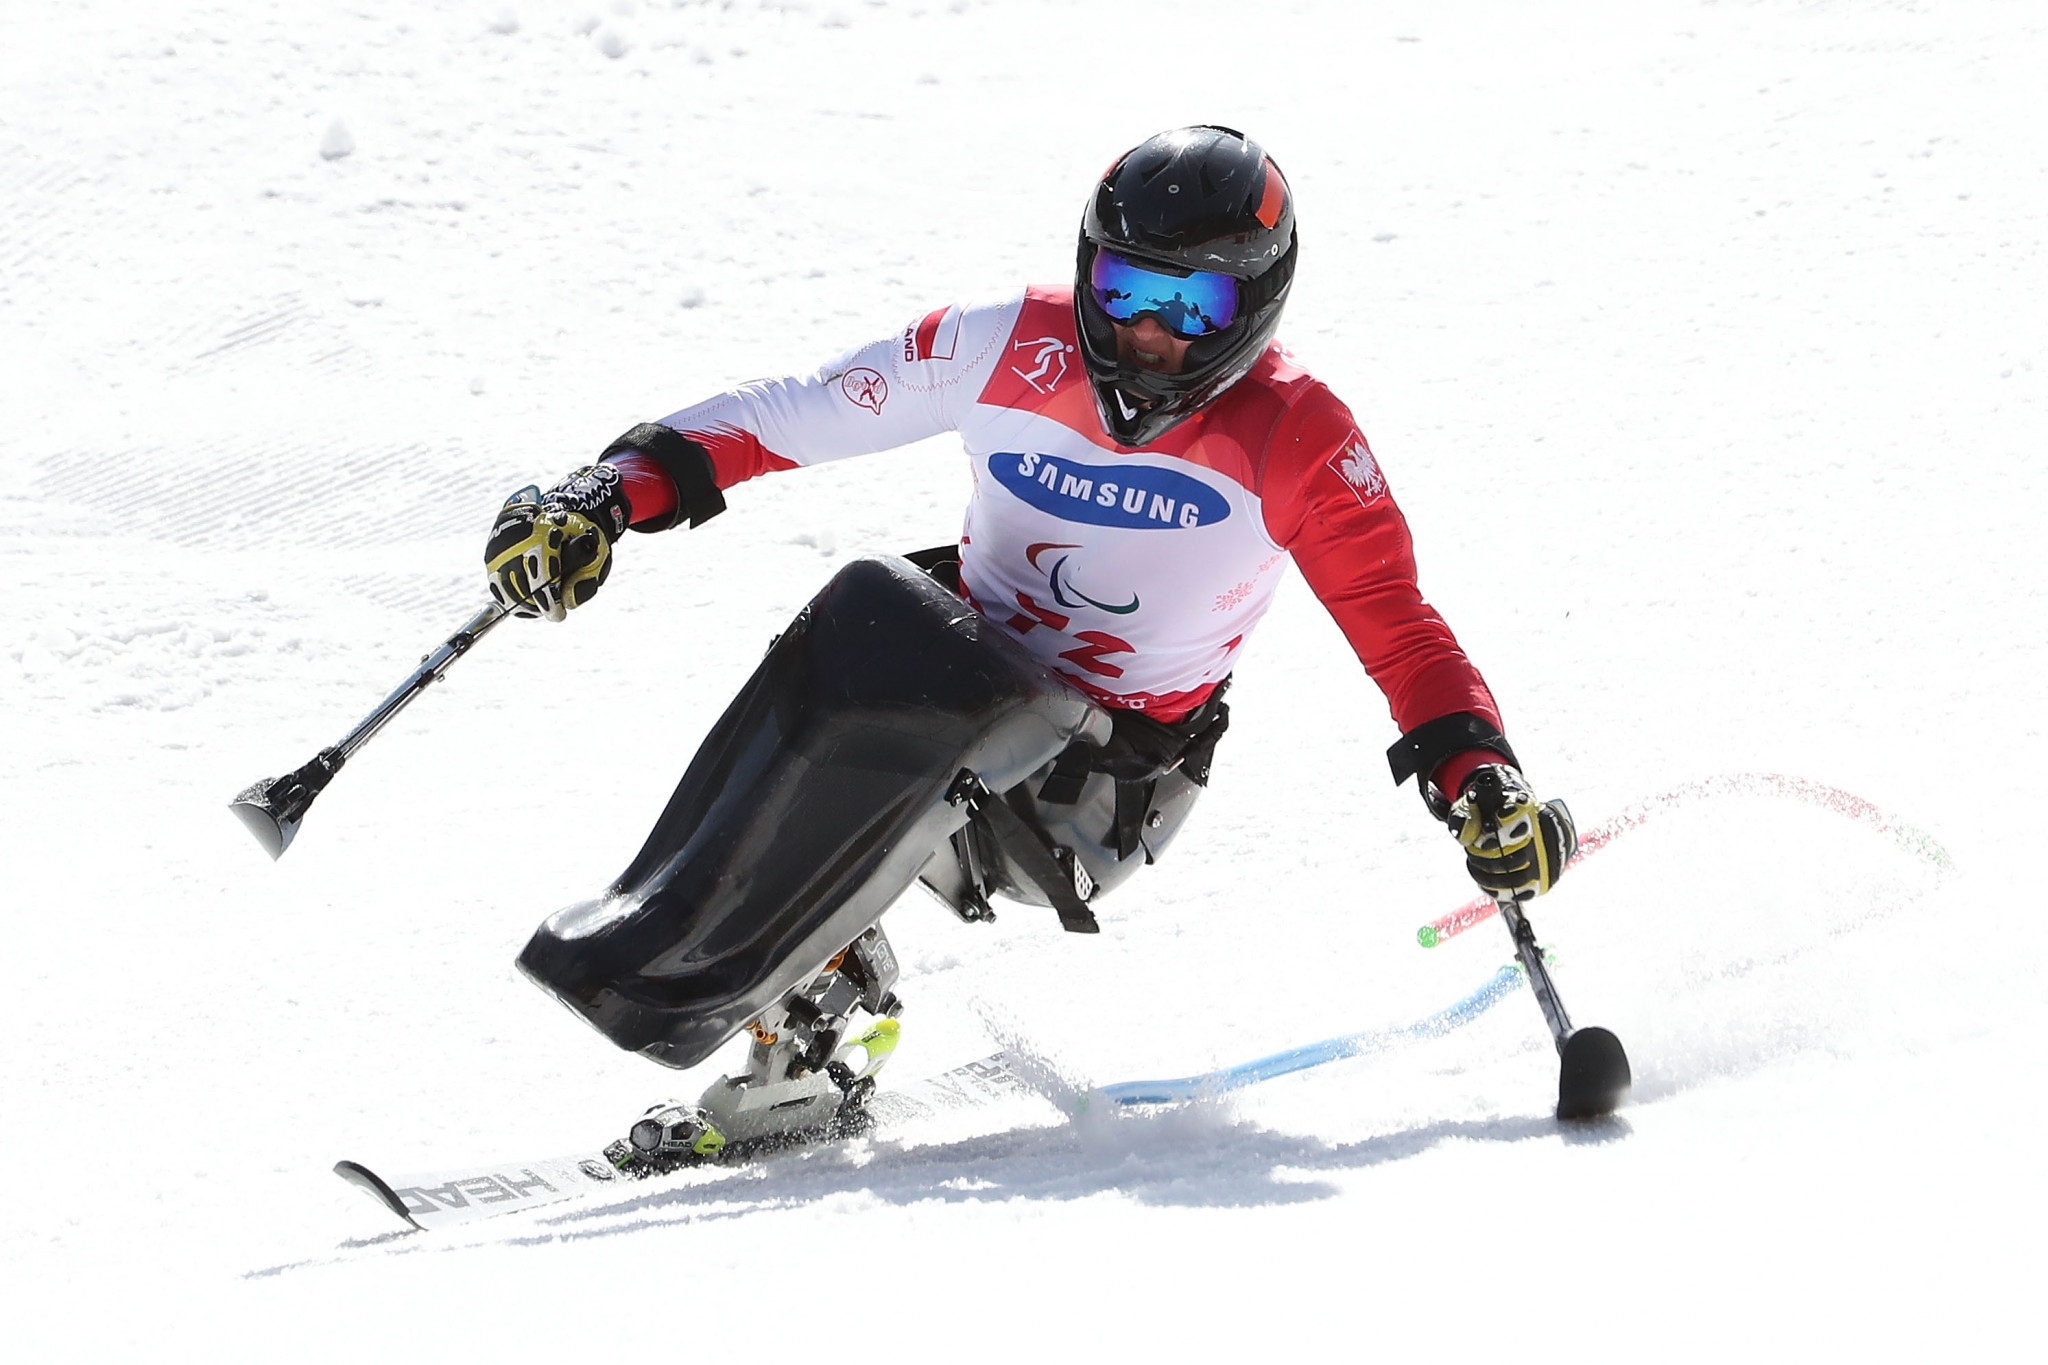 Igor Sikorski of Poland triumphed in the men's sitting giant slalom at the World Para Alpine Skiing World Cup ©Getty Images